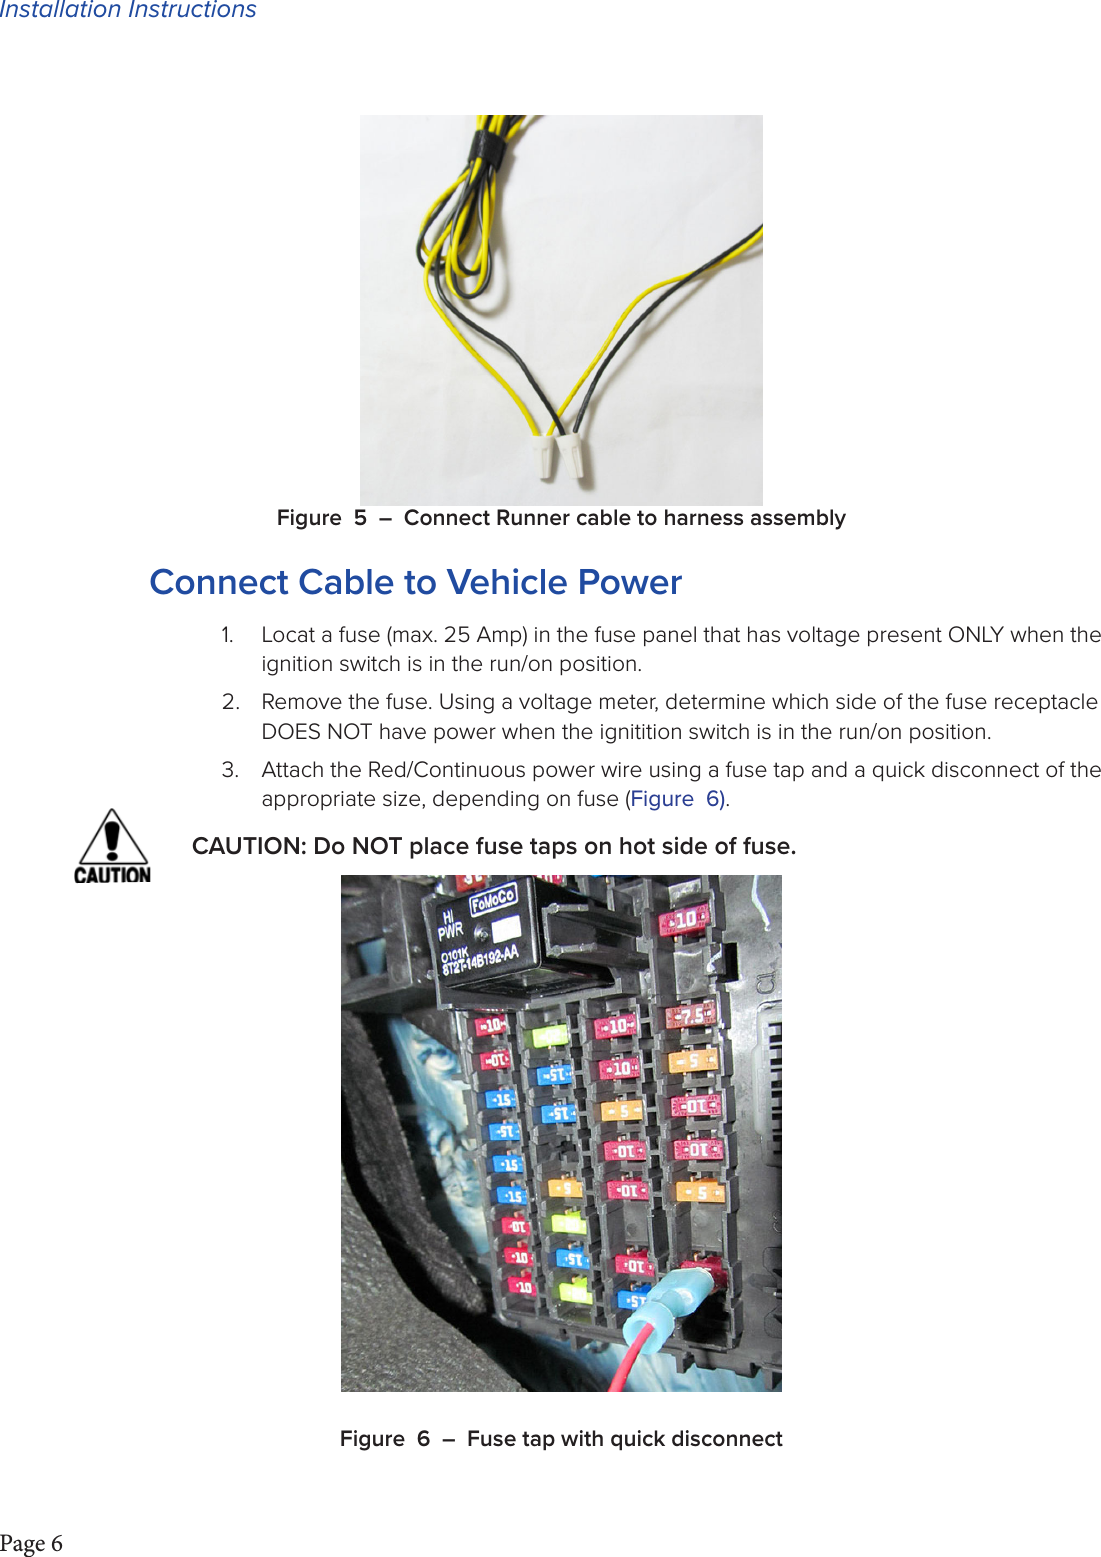 Installation InstructionsPage 6Figure 5 – Connect Runner cable to harness assemblyConnect Cable to Vehicle Power1.  Locat a fuse (max. 25 Amp) in the fuse panel that has voltage present ONLY when the ignition switch is in the run/on position.2.  Remove the fuse. Using a voltage meter, determine which side of the fuse receptacle DOES NOT have power when the ignitition switch is in the run/on position.3.  Attach the Red/Continuous power wire using a fuse tap and a quick disconnect of the appropriate size, depending on fuse (Figure 6).CAUTION: Do NOT place fuse taps on hot side of fuse.Figure 6 – Fuse tap with quick disconnect